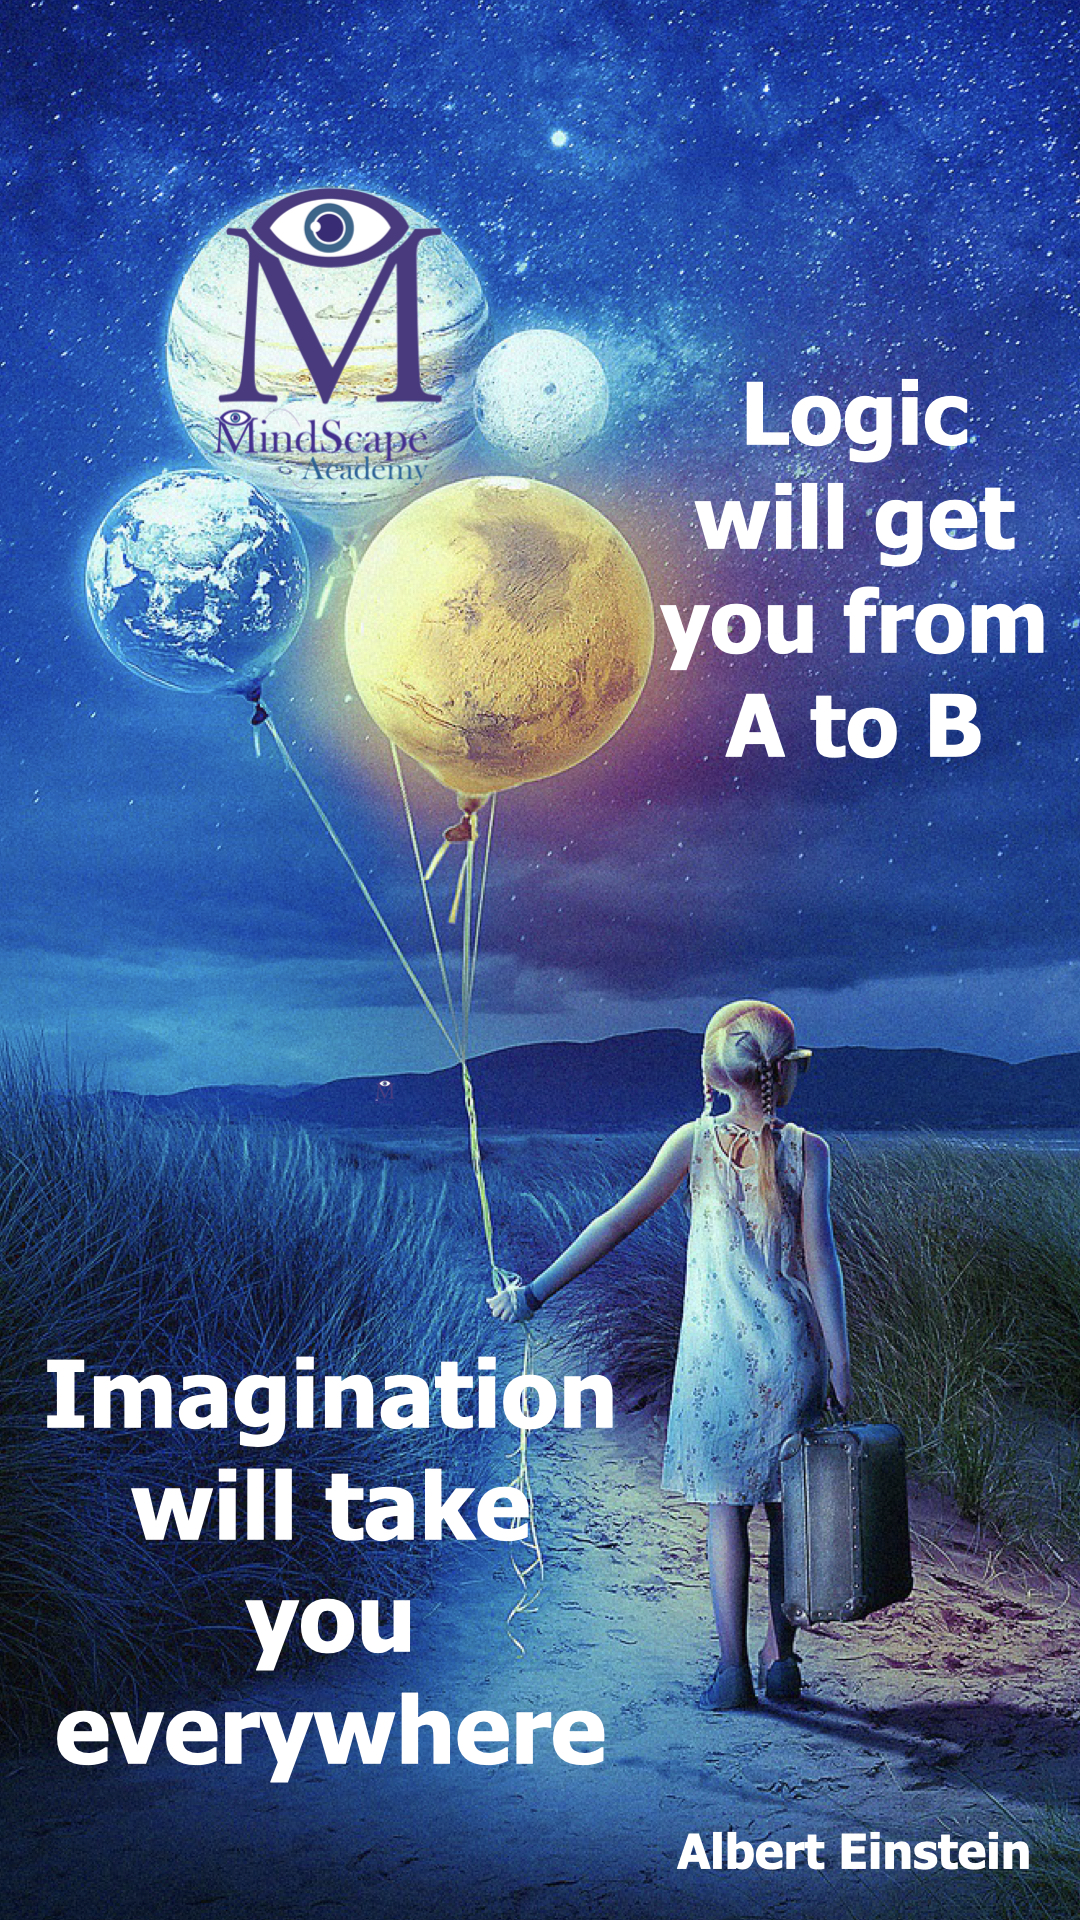 Imagination will take you everywhere